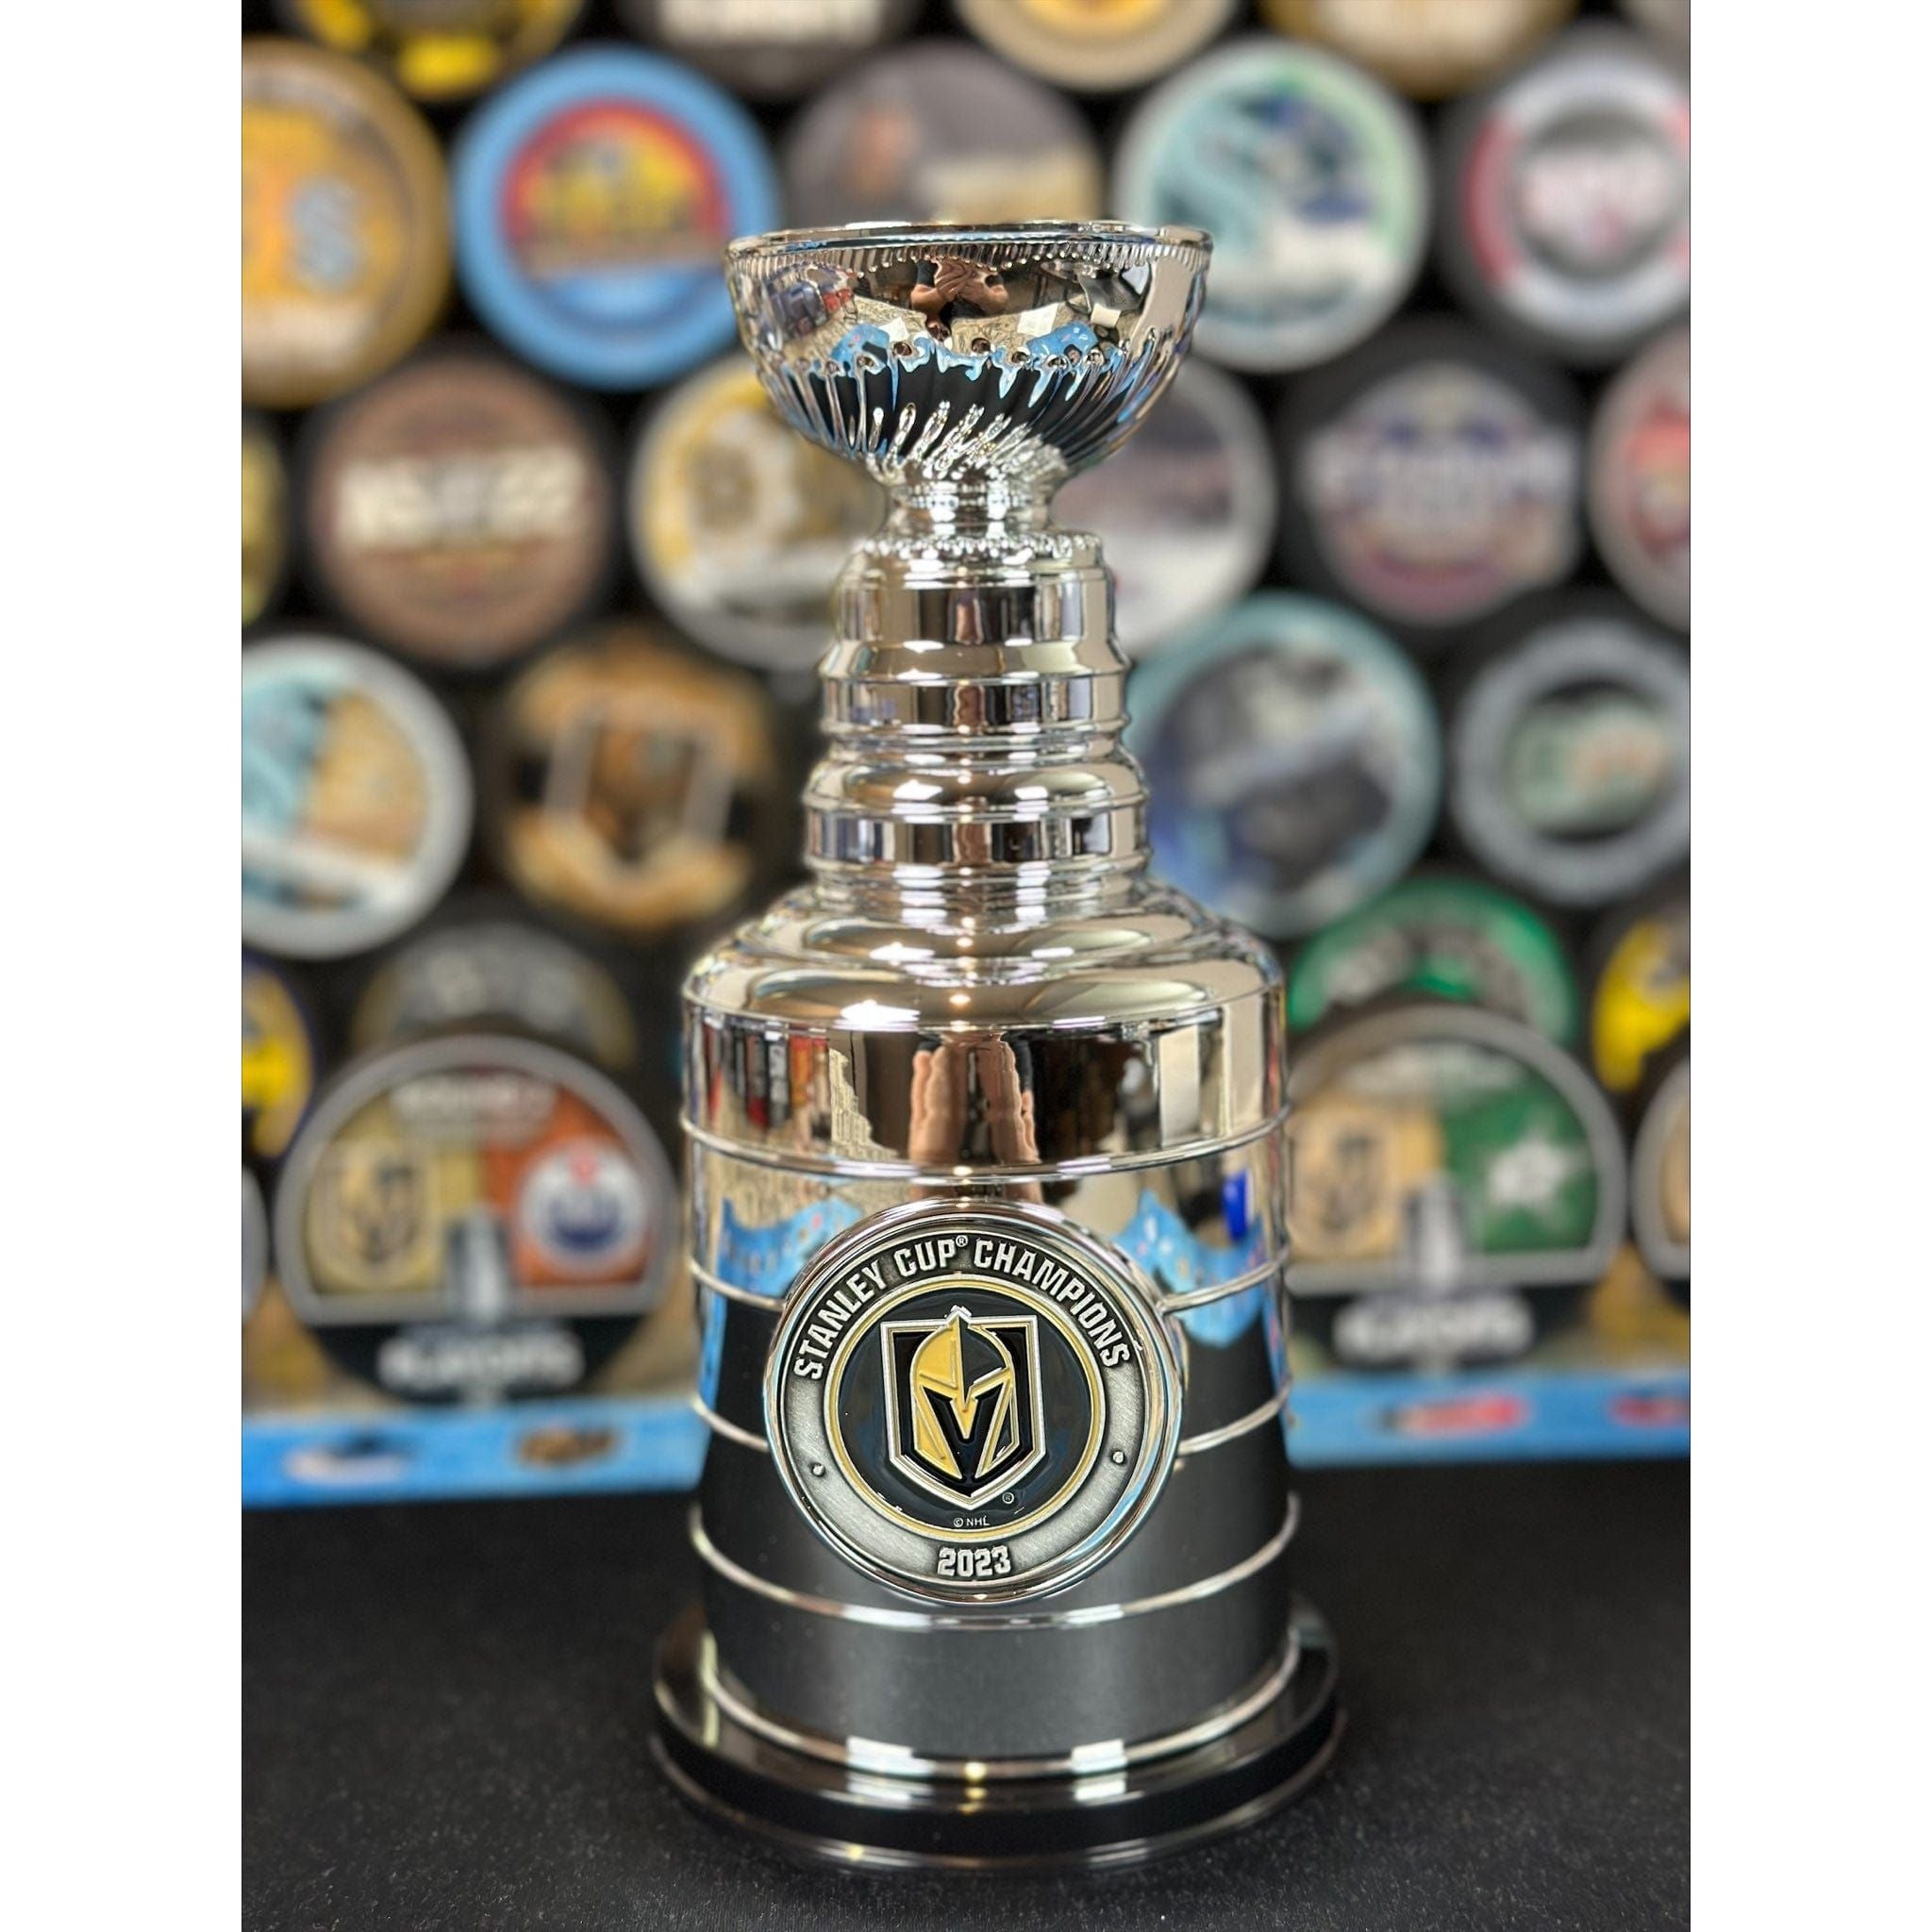 🏆 - Vegas Golden Knights on X: ALSO A replica of the sword in